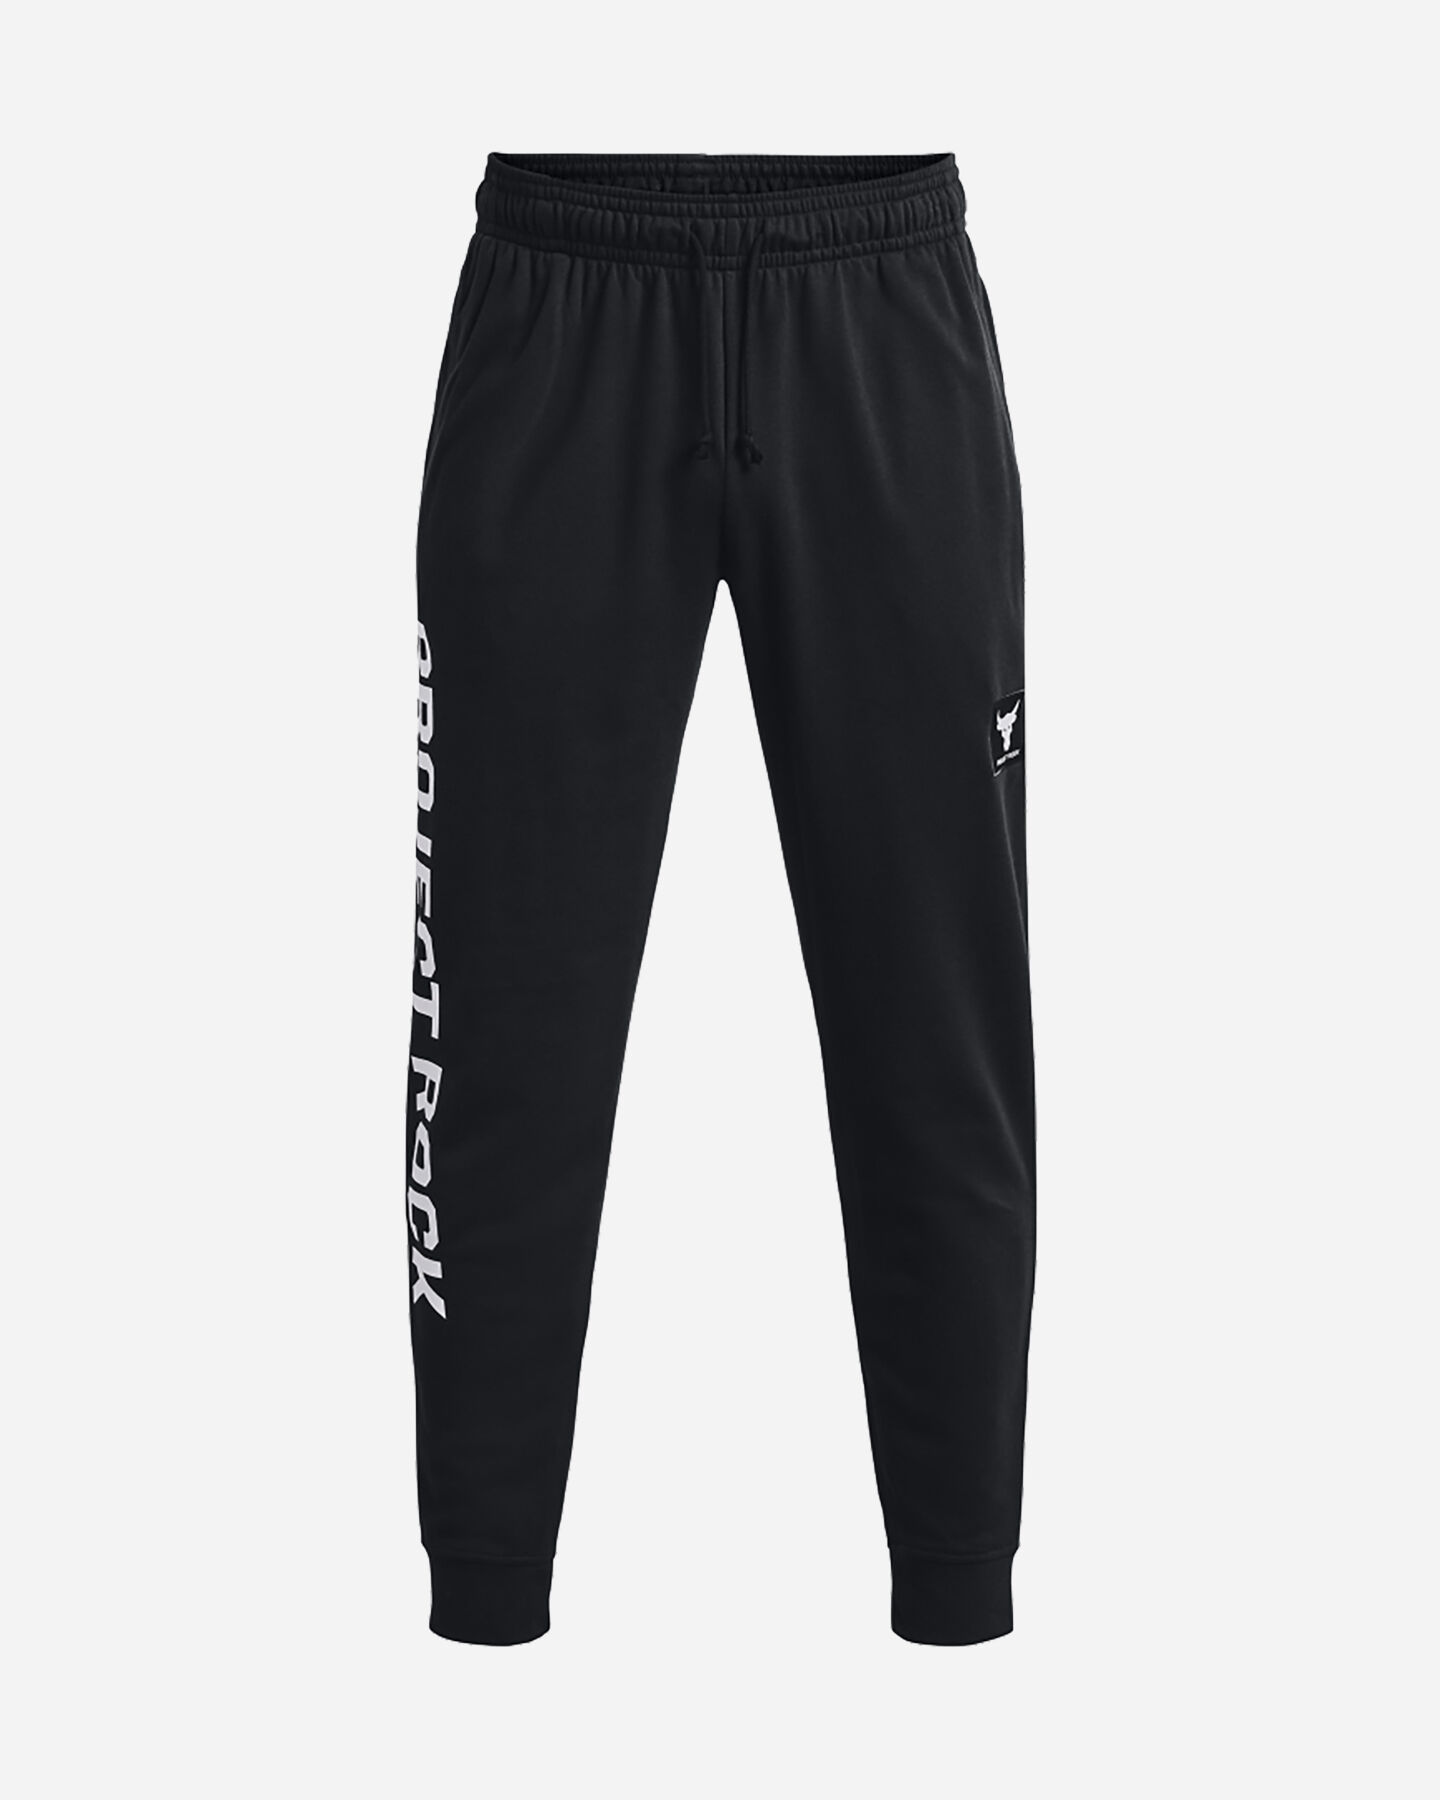  Pantalone UNDER ARMOUR THE ROCK M S5528885|0001|XS scatto 0